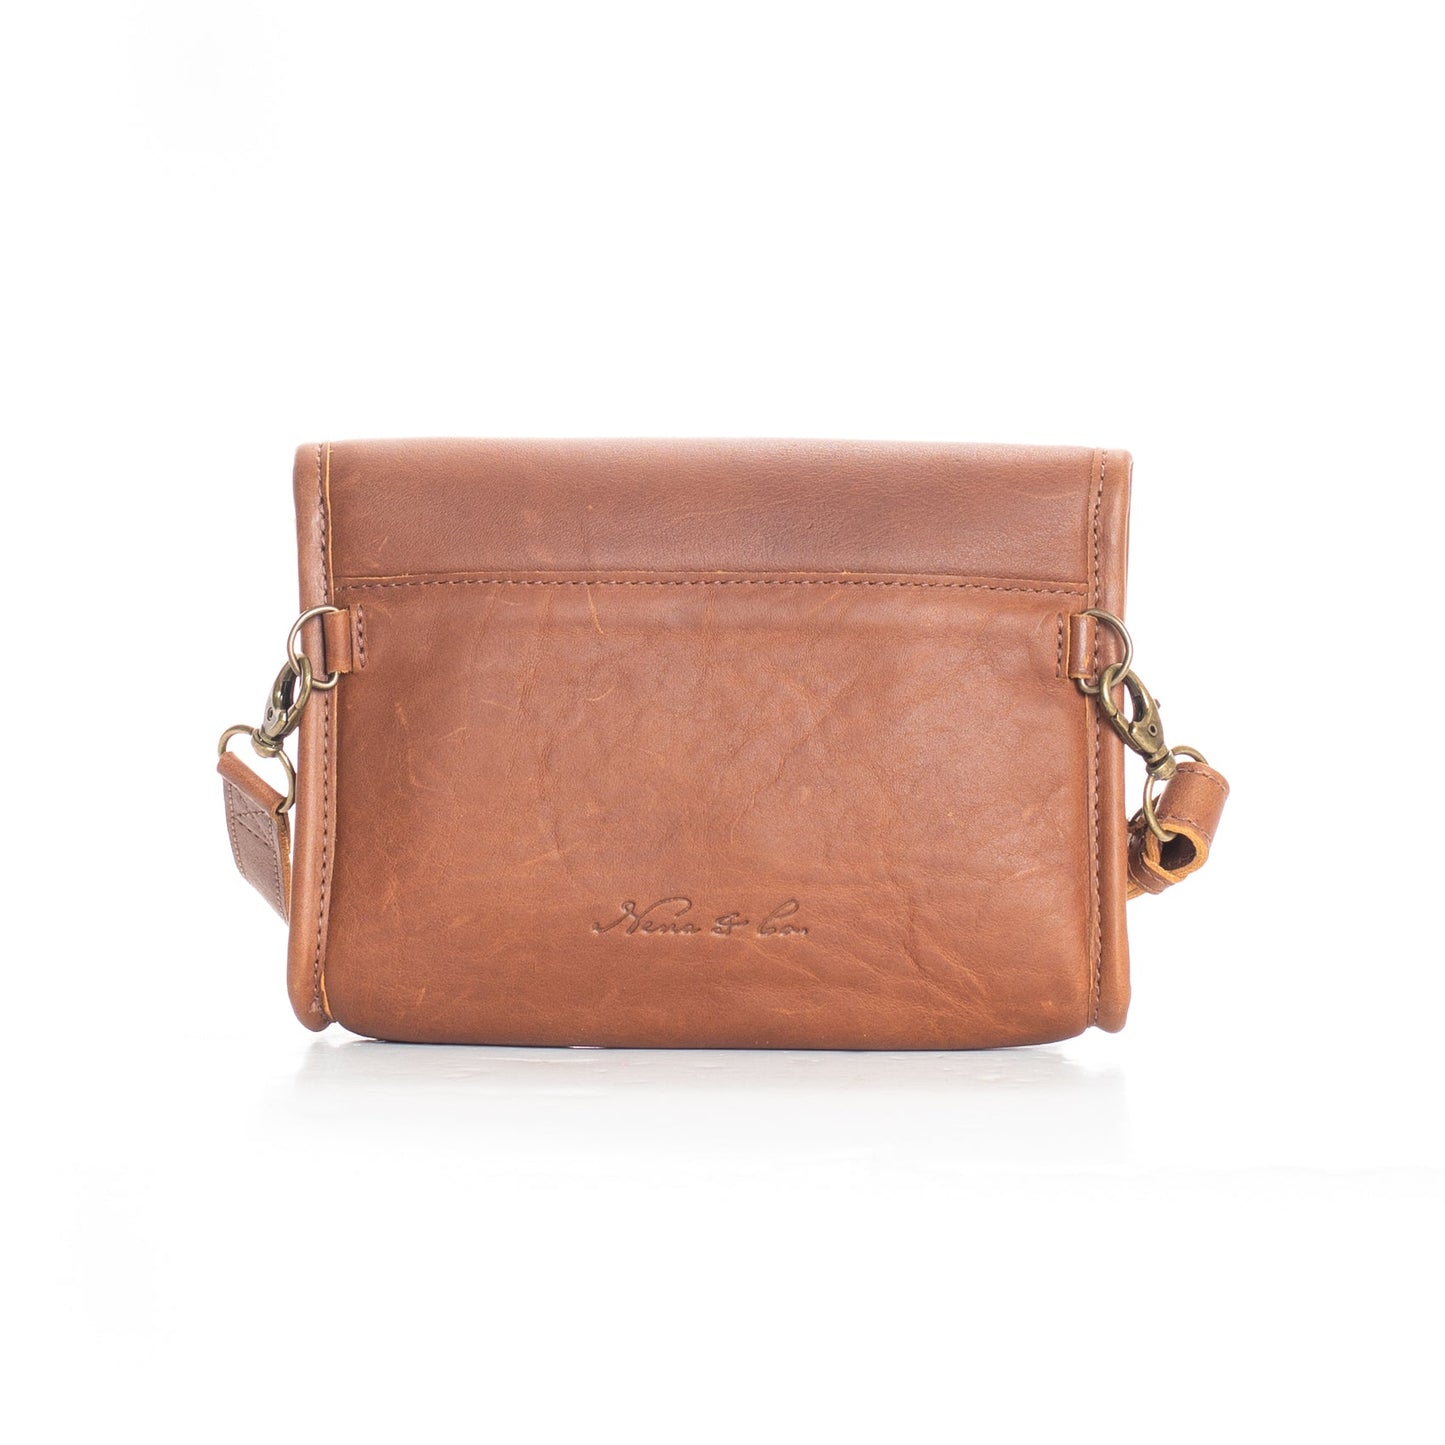 TESORO CROSSBODY WALLET - FULL LEATHER COLLECTION - CAFE